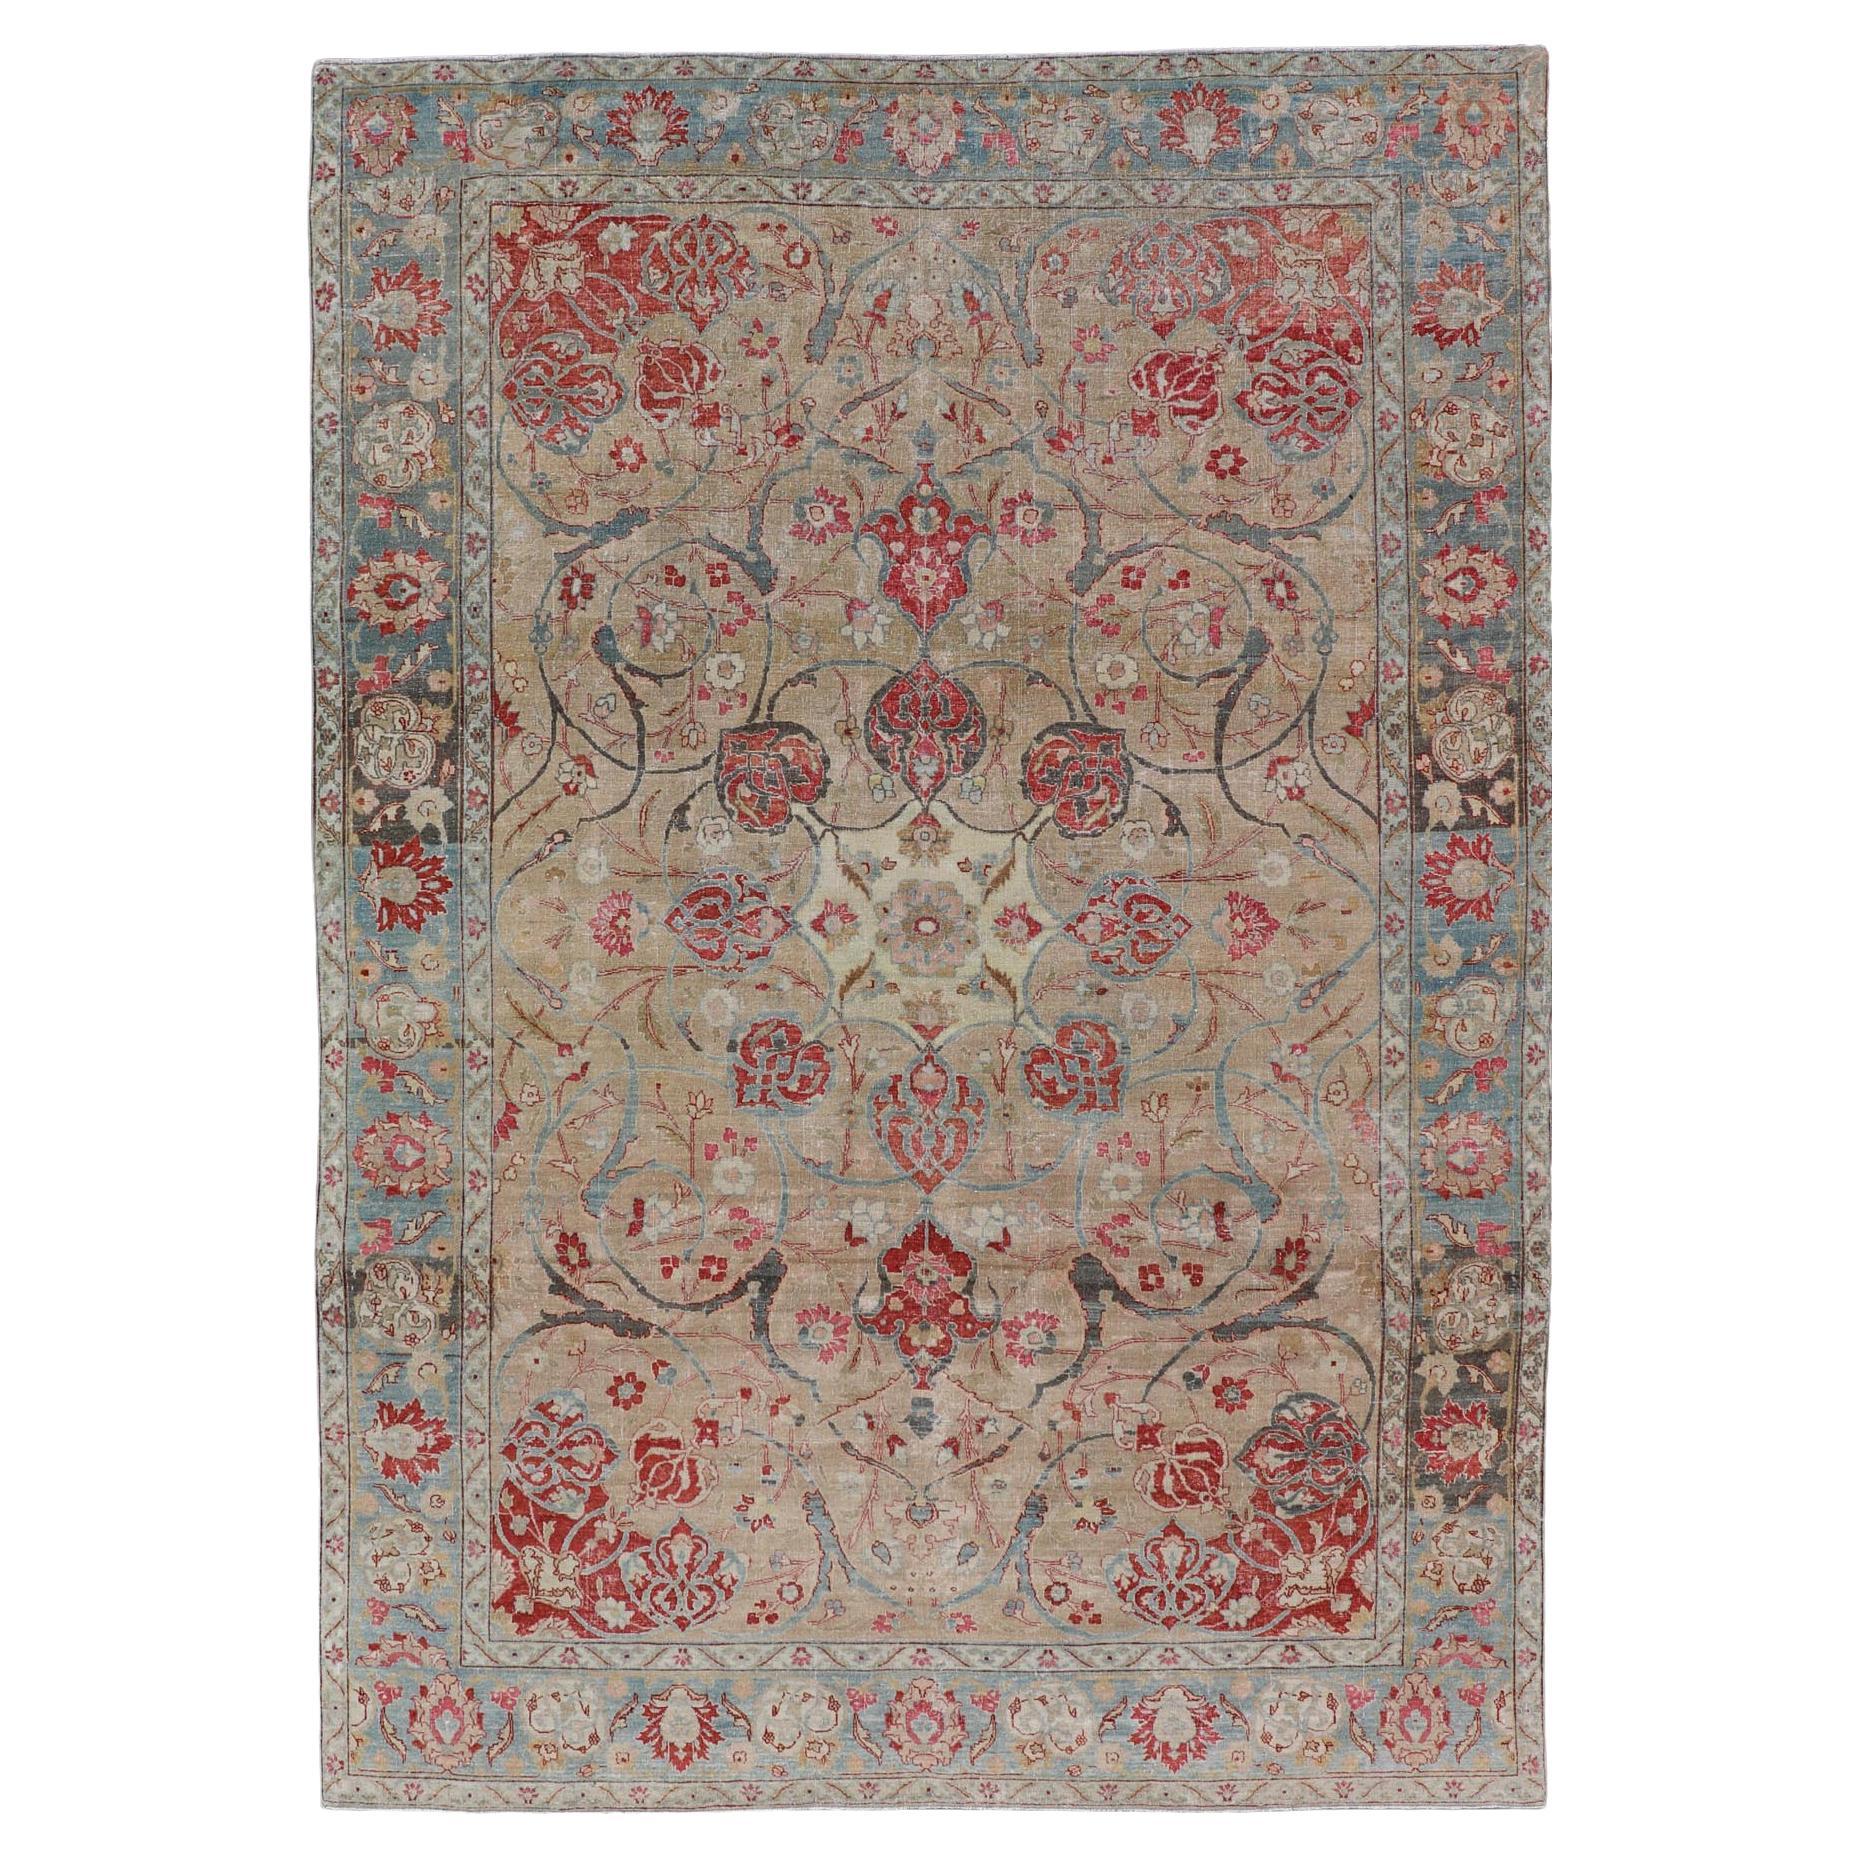 Antique Persian Tabriz Rug with Floral Medallion Design in Tan, Red, and Blue For Sale